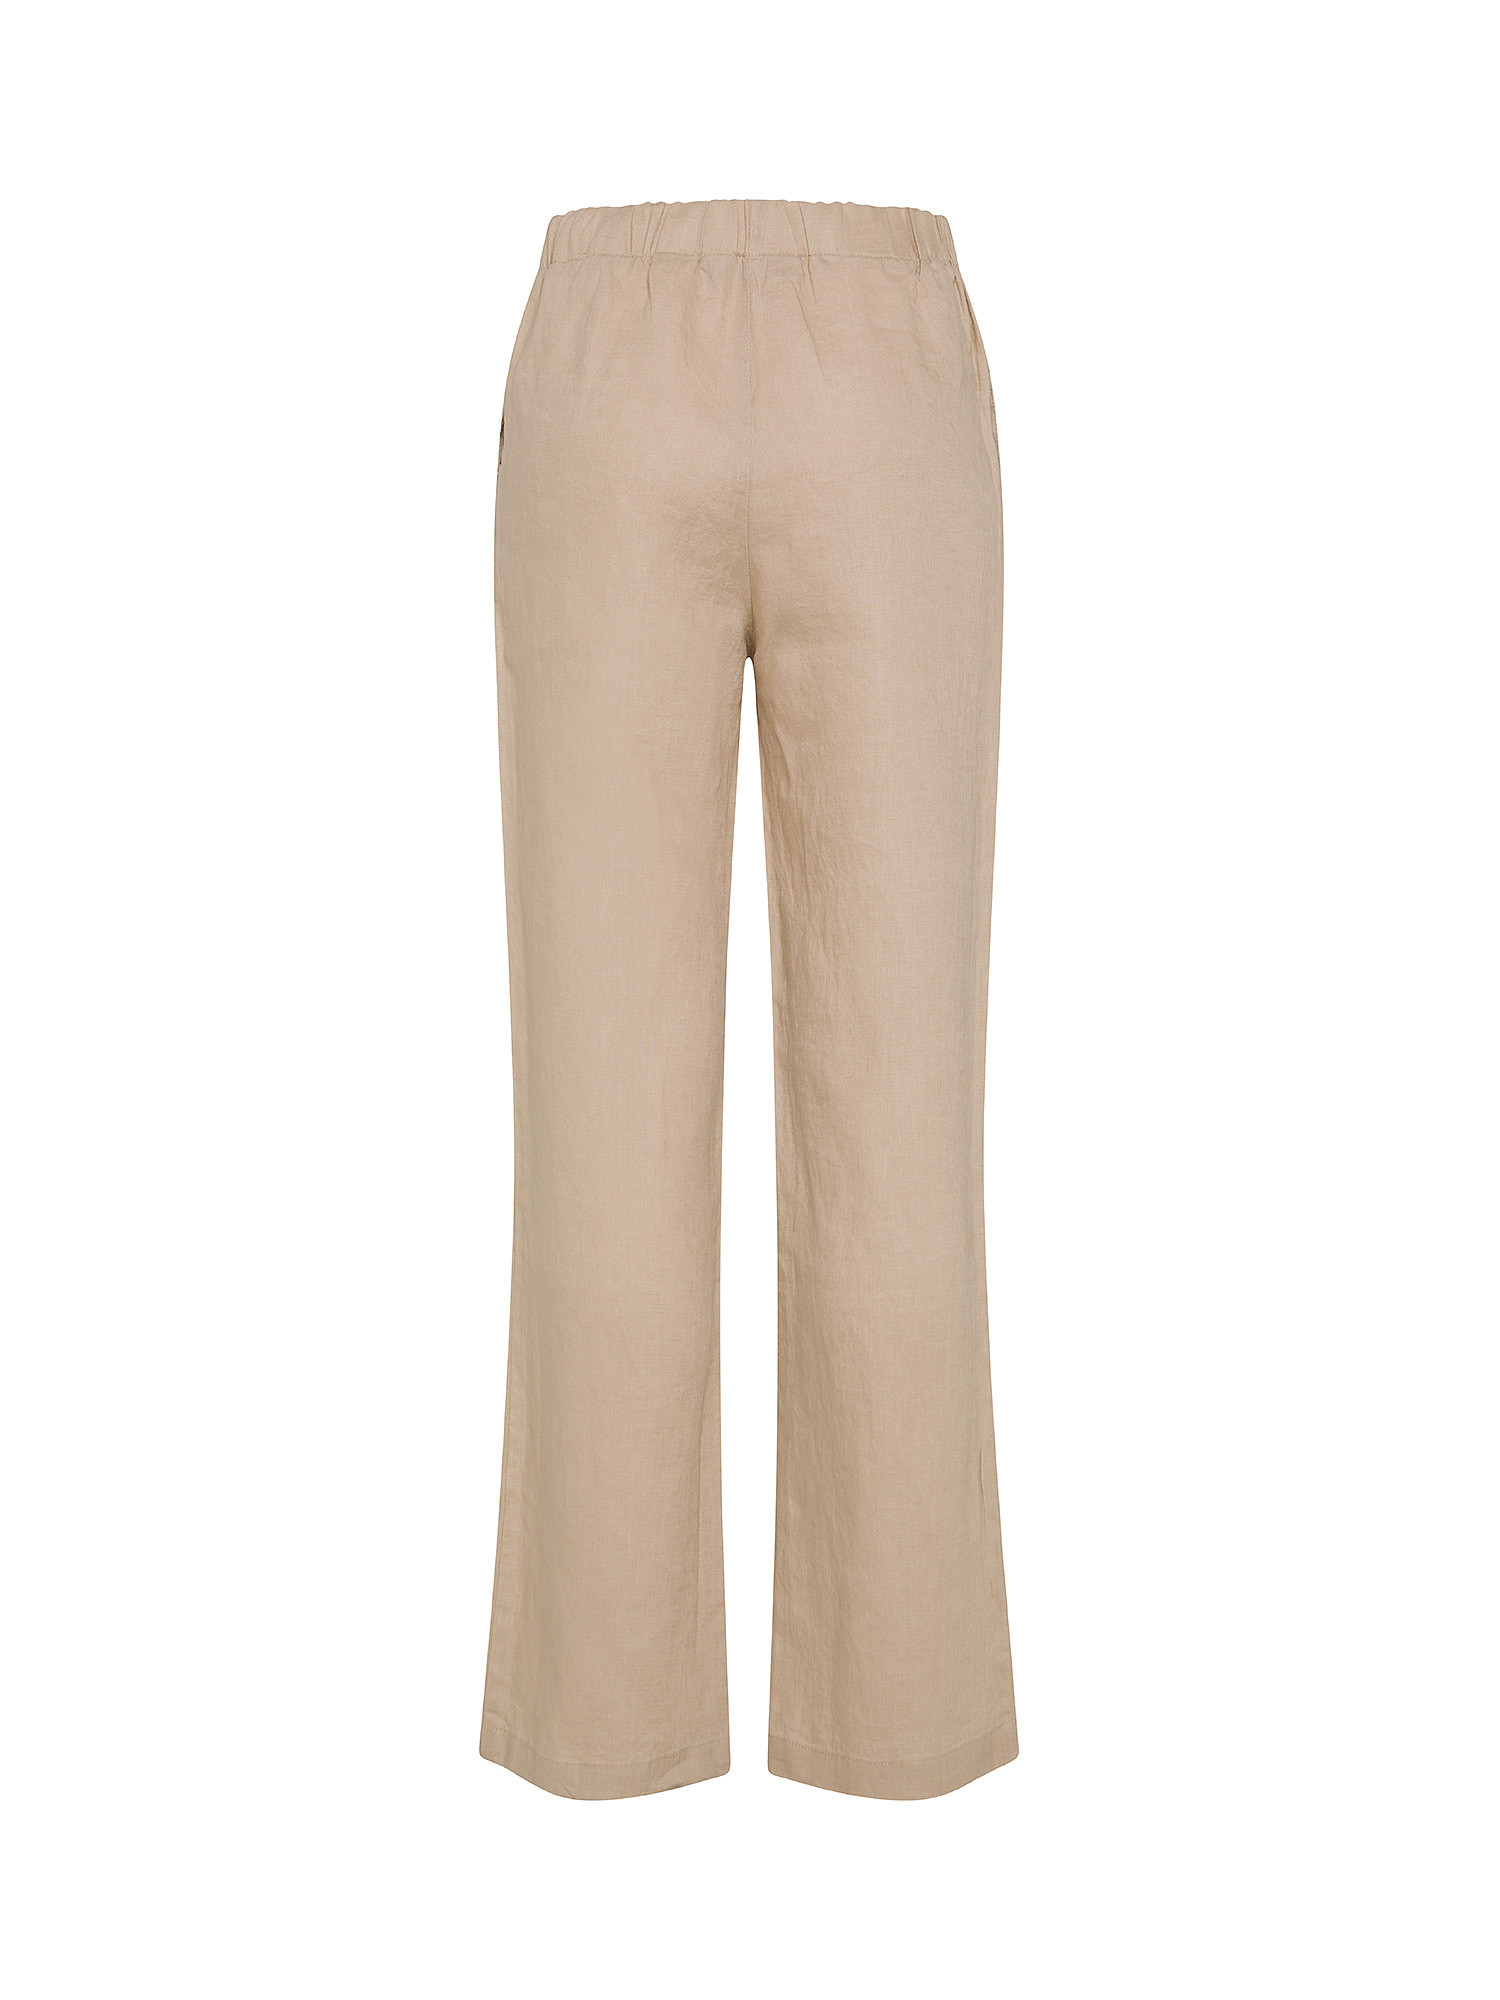 Koan - Straight linen trousers, Beige, large image number 1